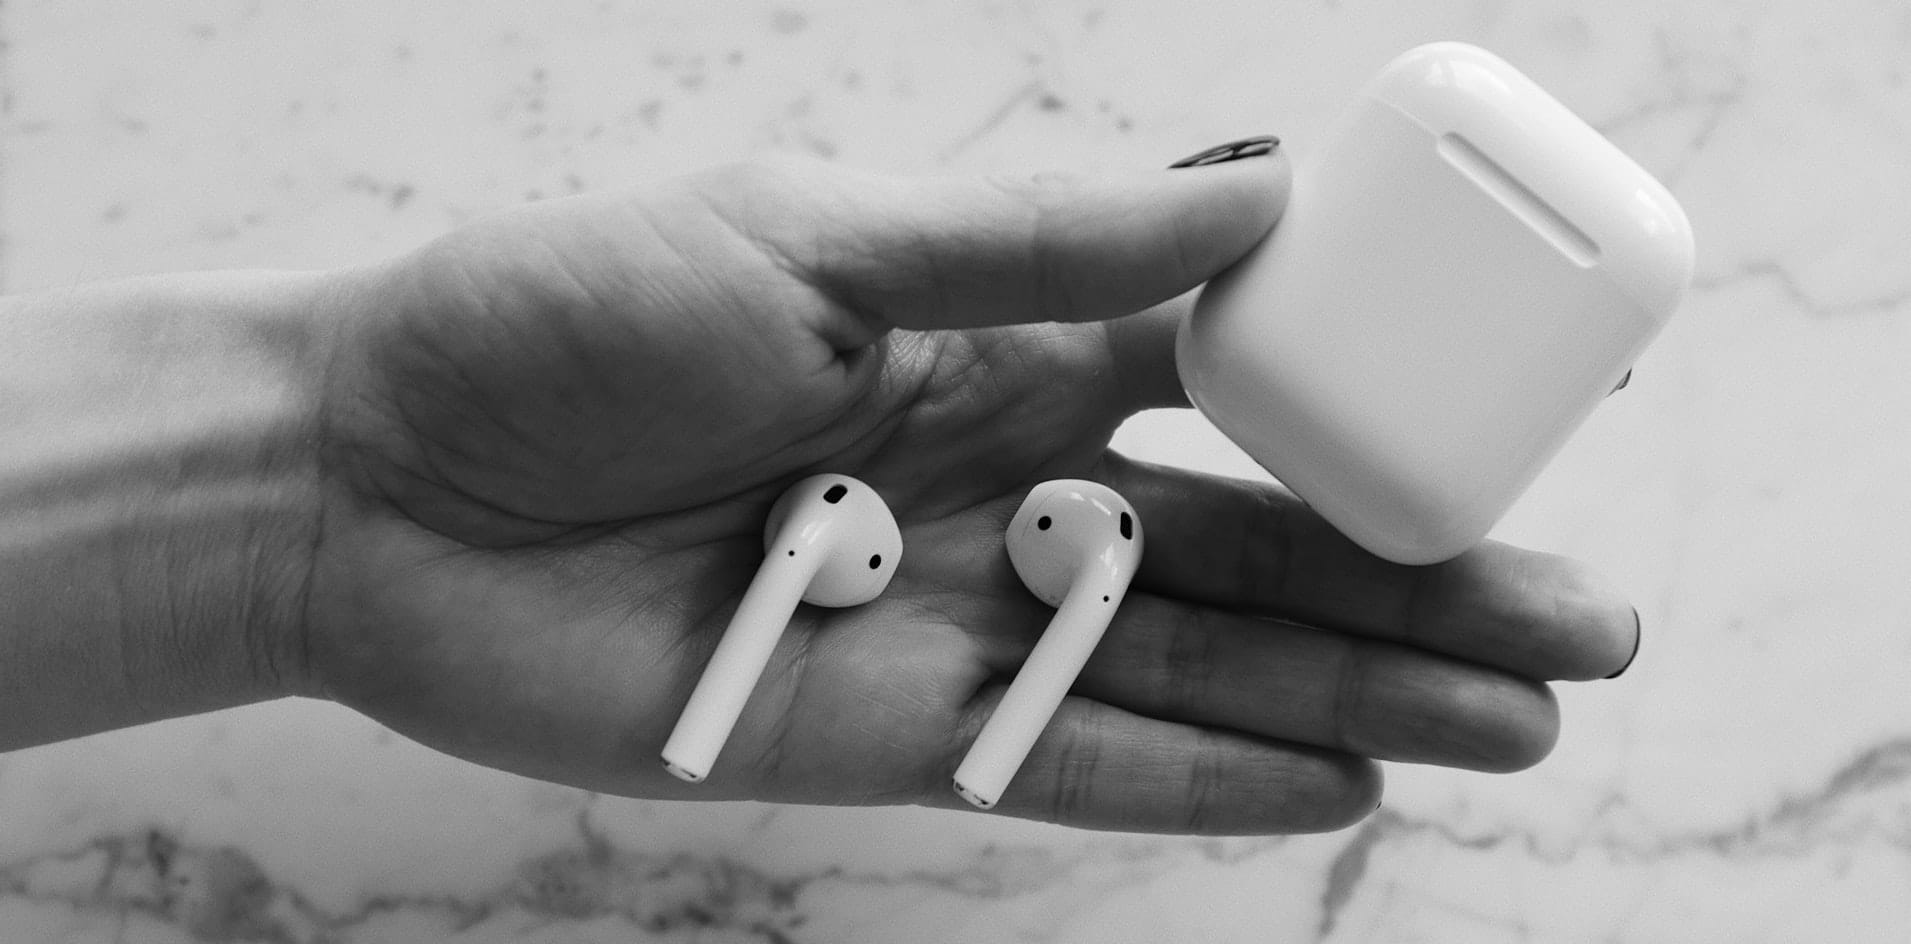 AirPods and its case on palm